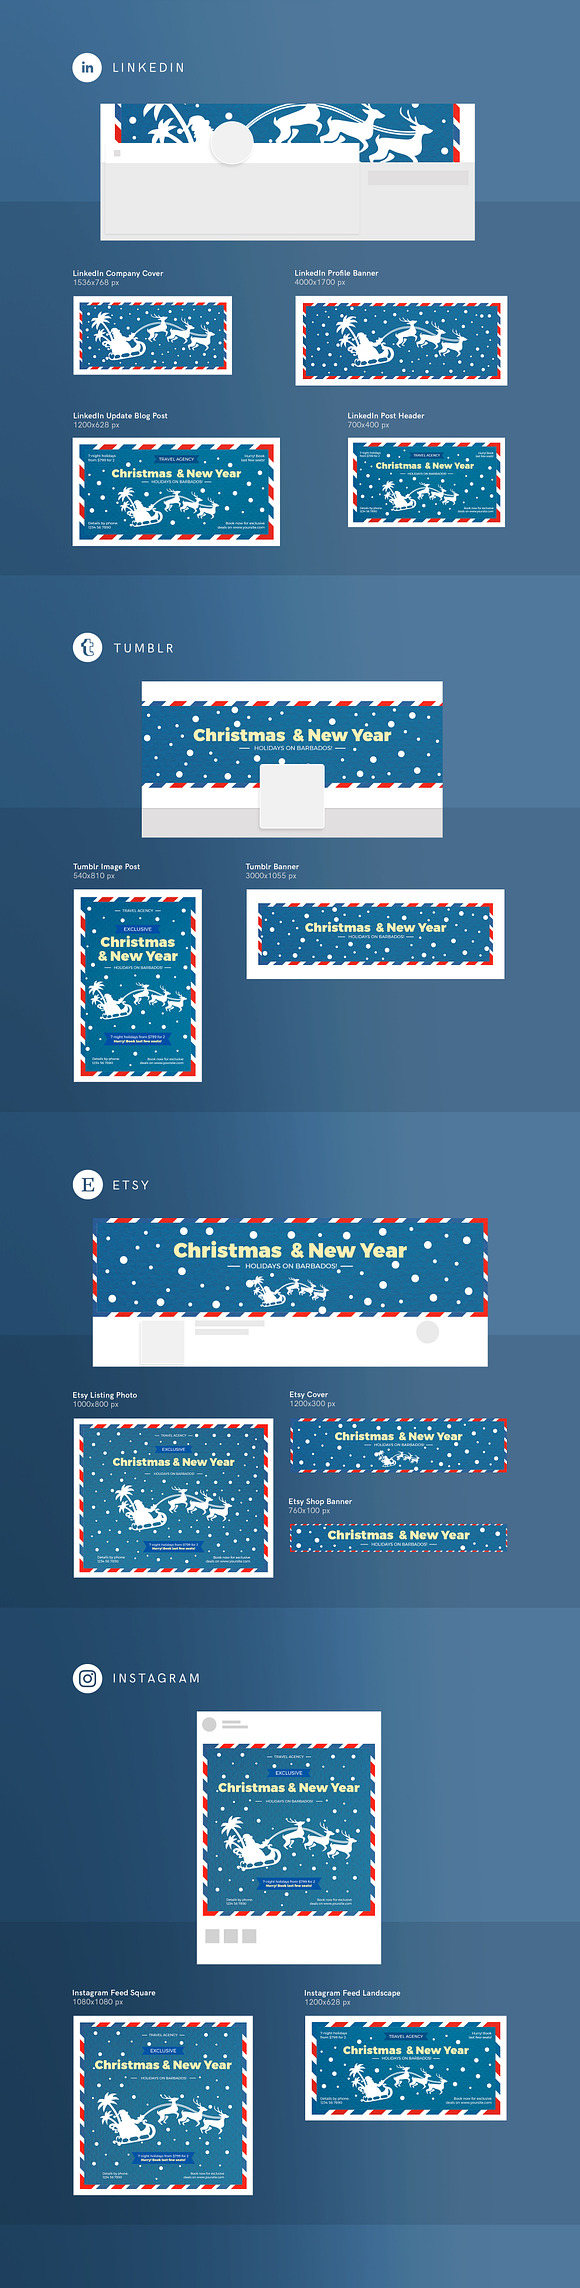 Social Media Pack | Christmas Travel in Social Media Templates - product preview 2